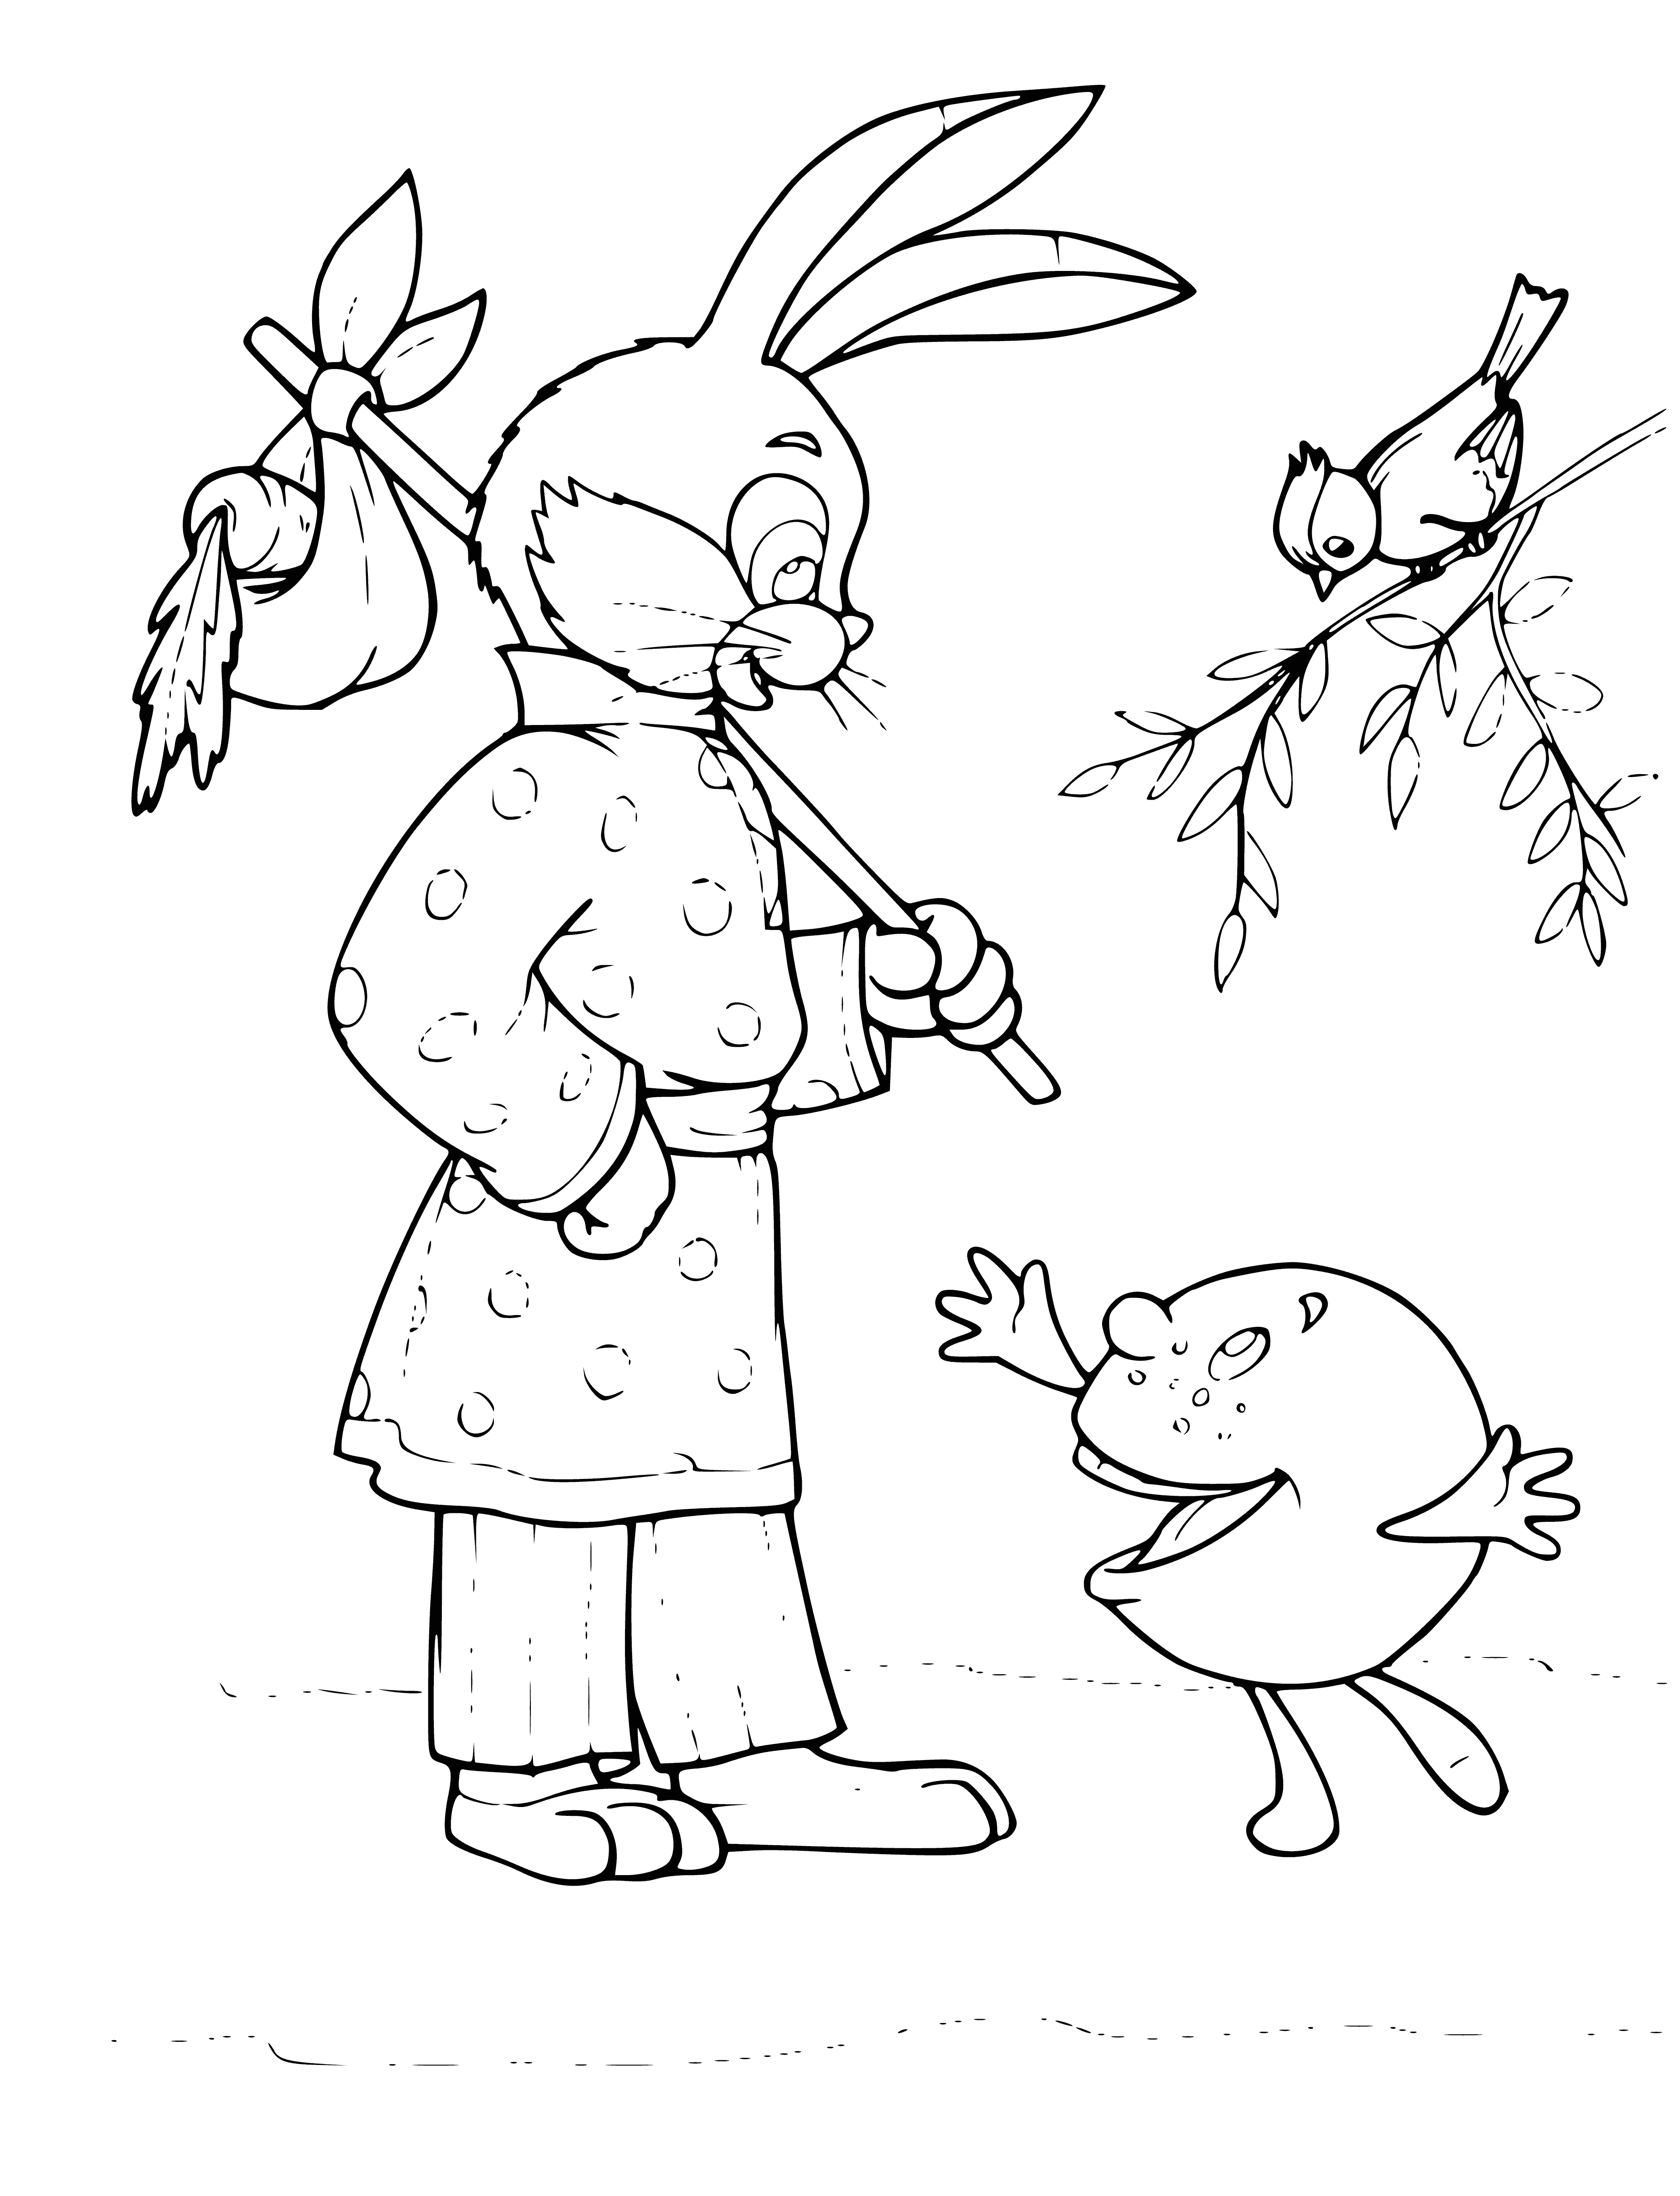 coloring page: Gingerbread man outruns hare in Russian folk tale; the hare never catches him.